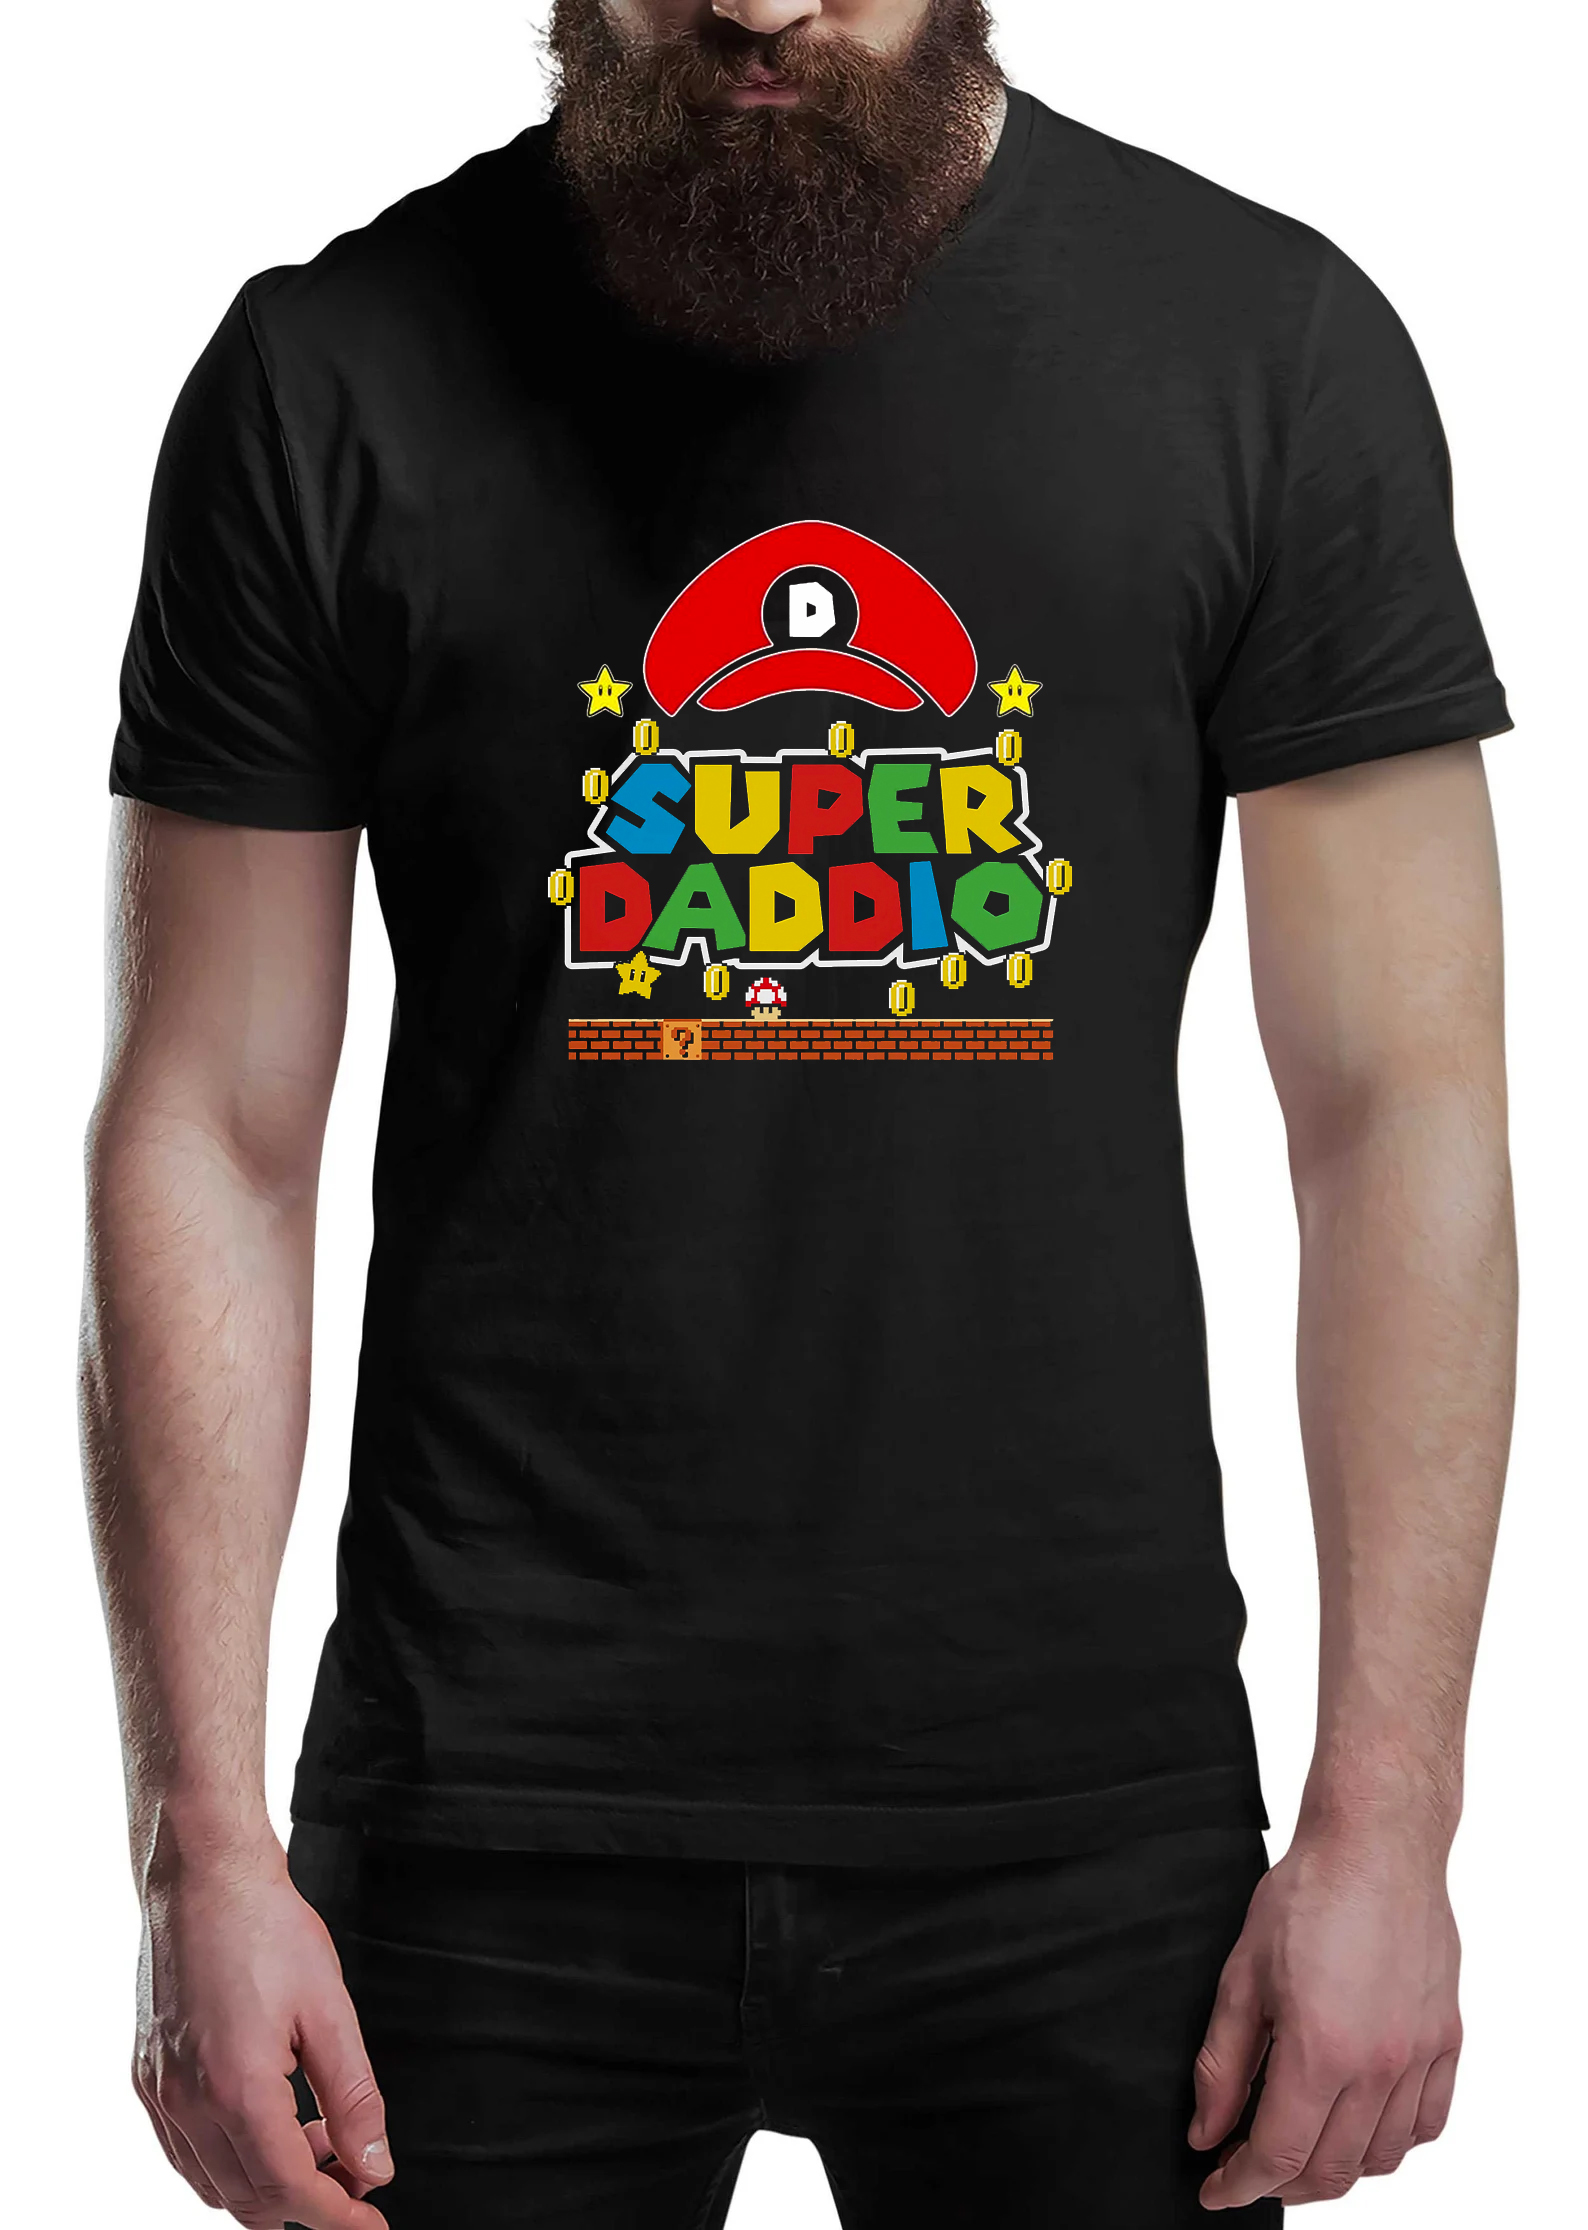 Super Daddio T-Shirt, Mario Dad Shirt, Fathers Day Shirt, Gamer Daddy Tee, Funny Fathers Day Gift, Funny Shirt, Funny Daddio Tee, Funny Shirt, Best dad gift